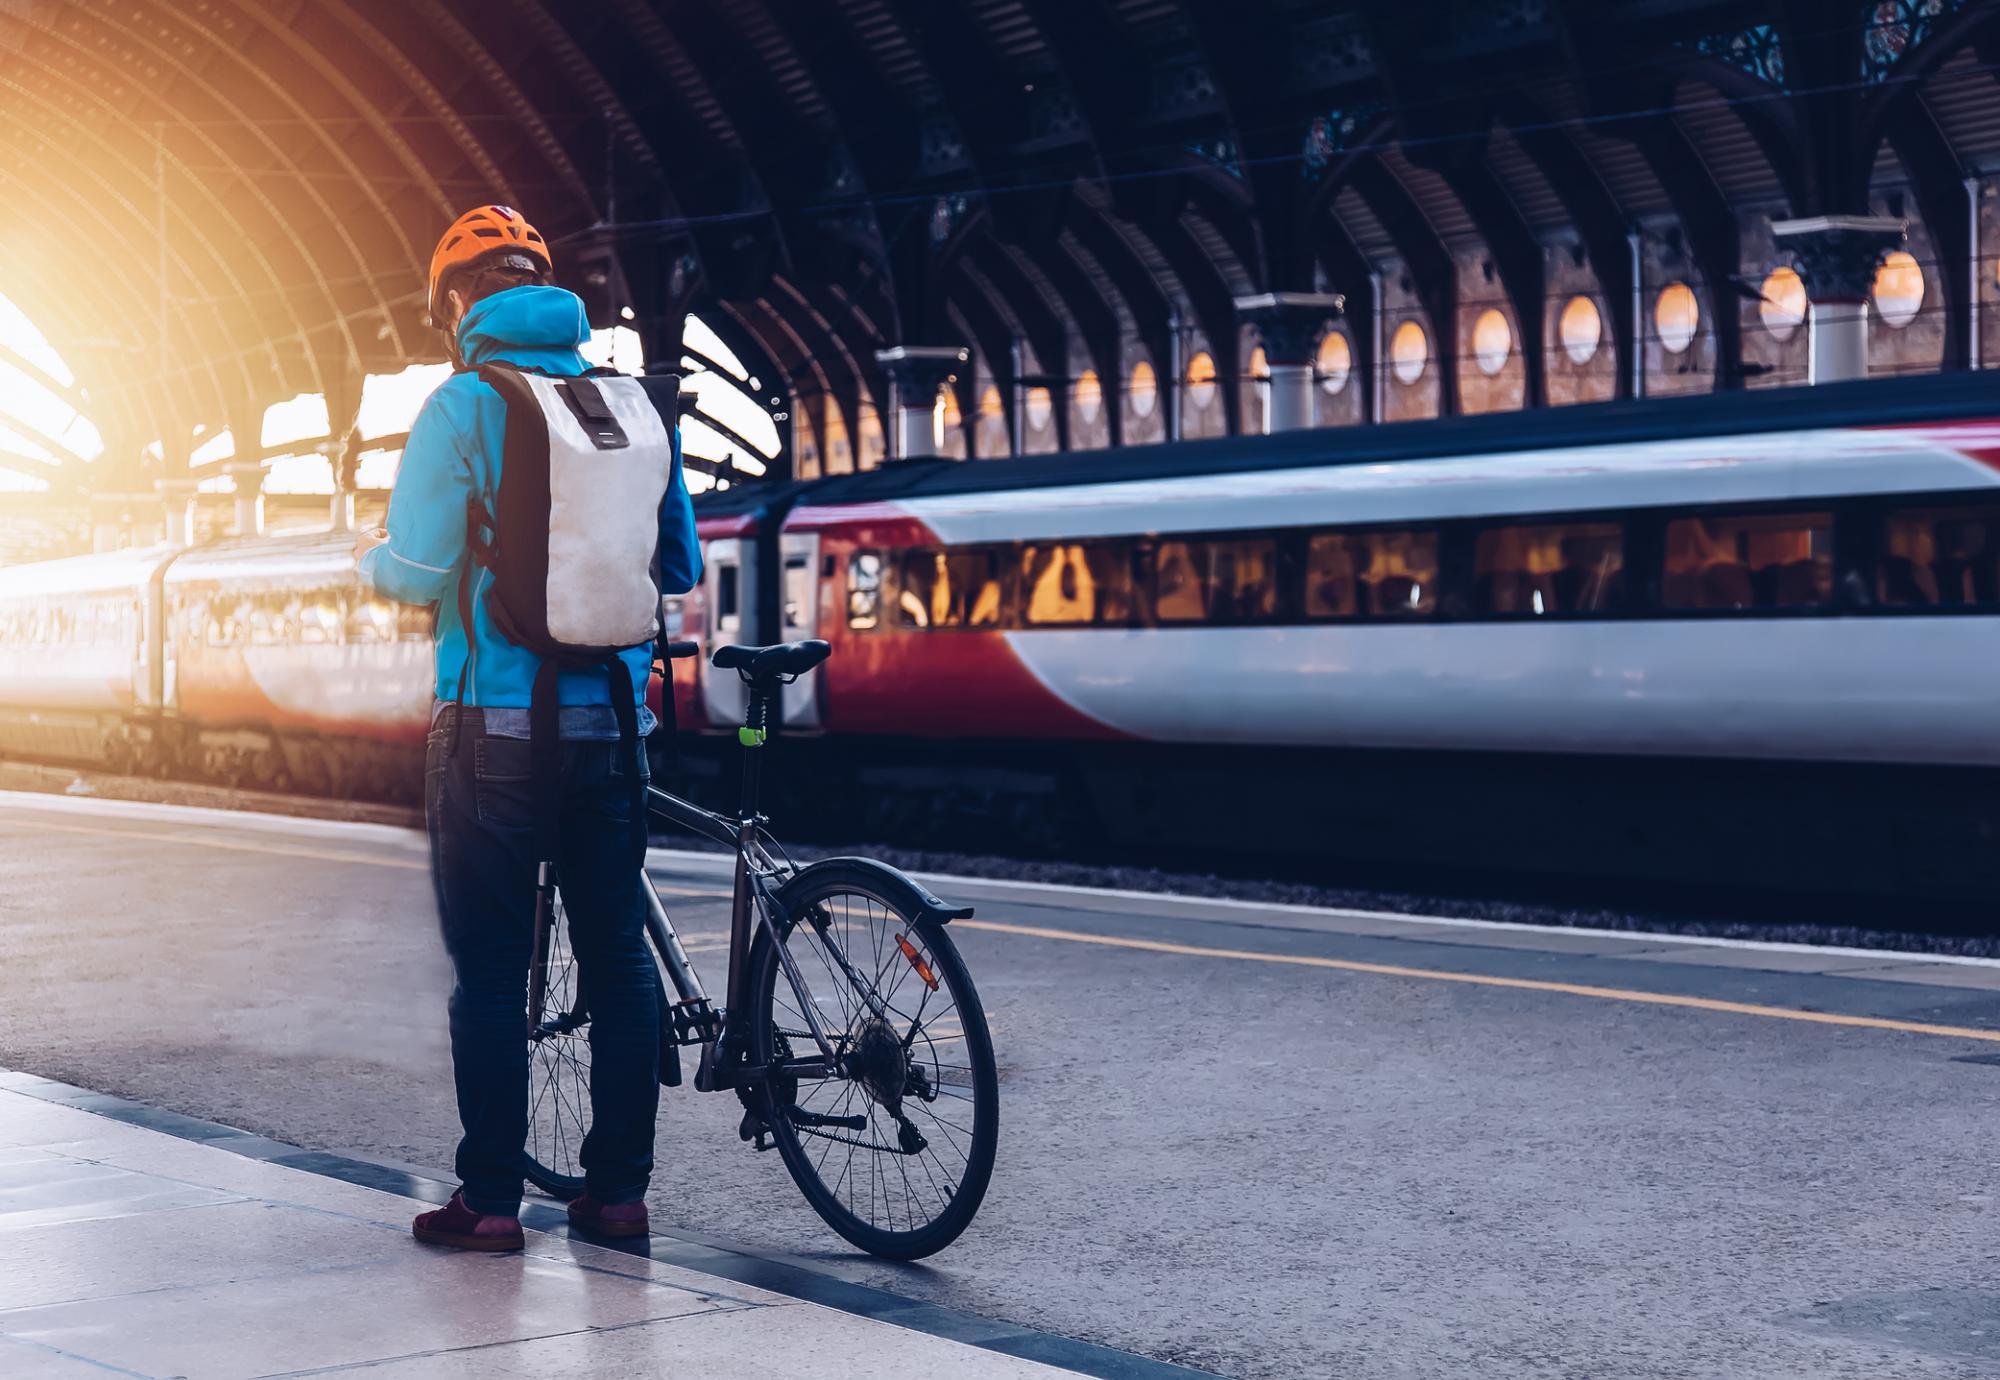 Man and bike, with train in background